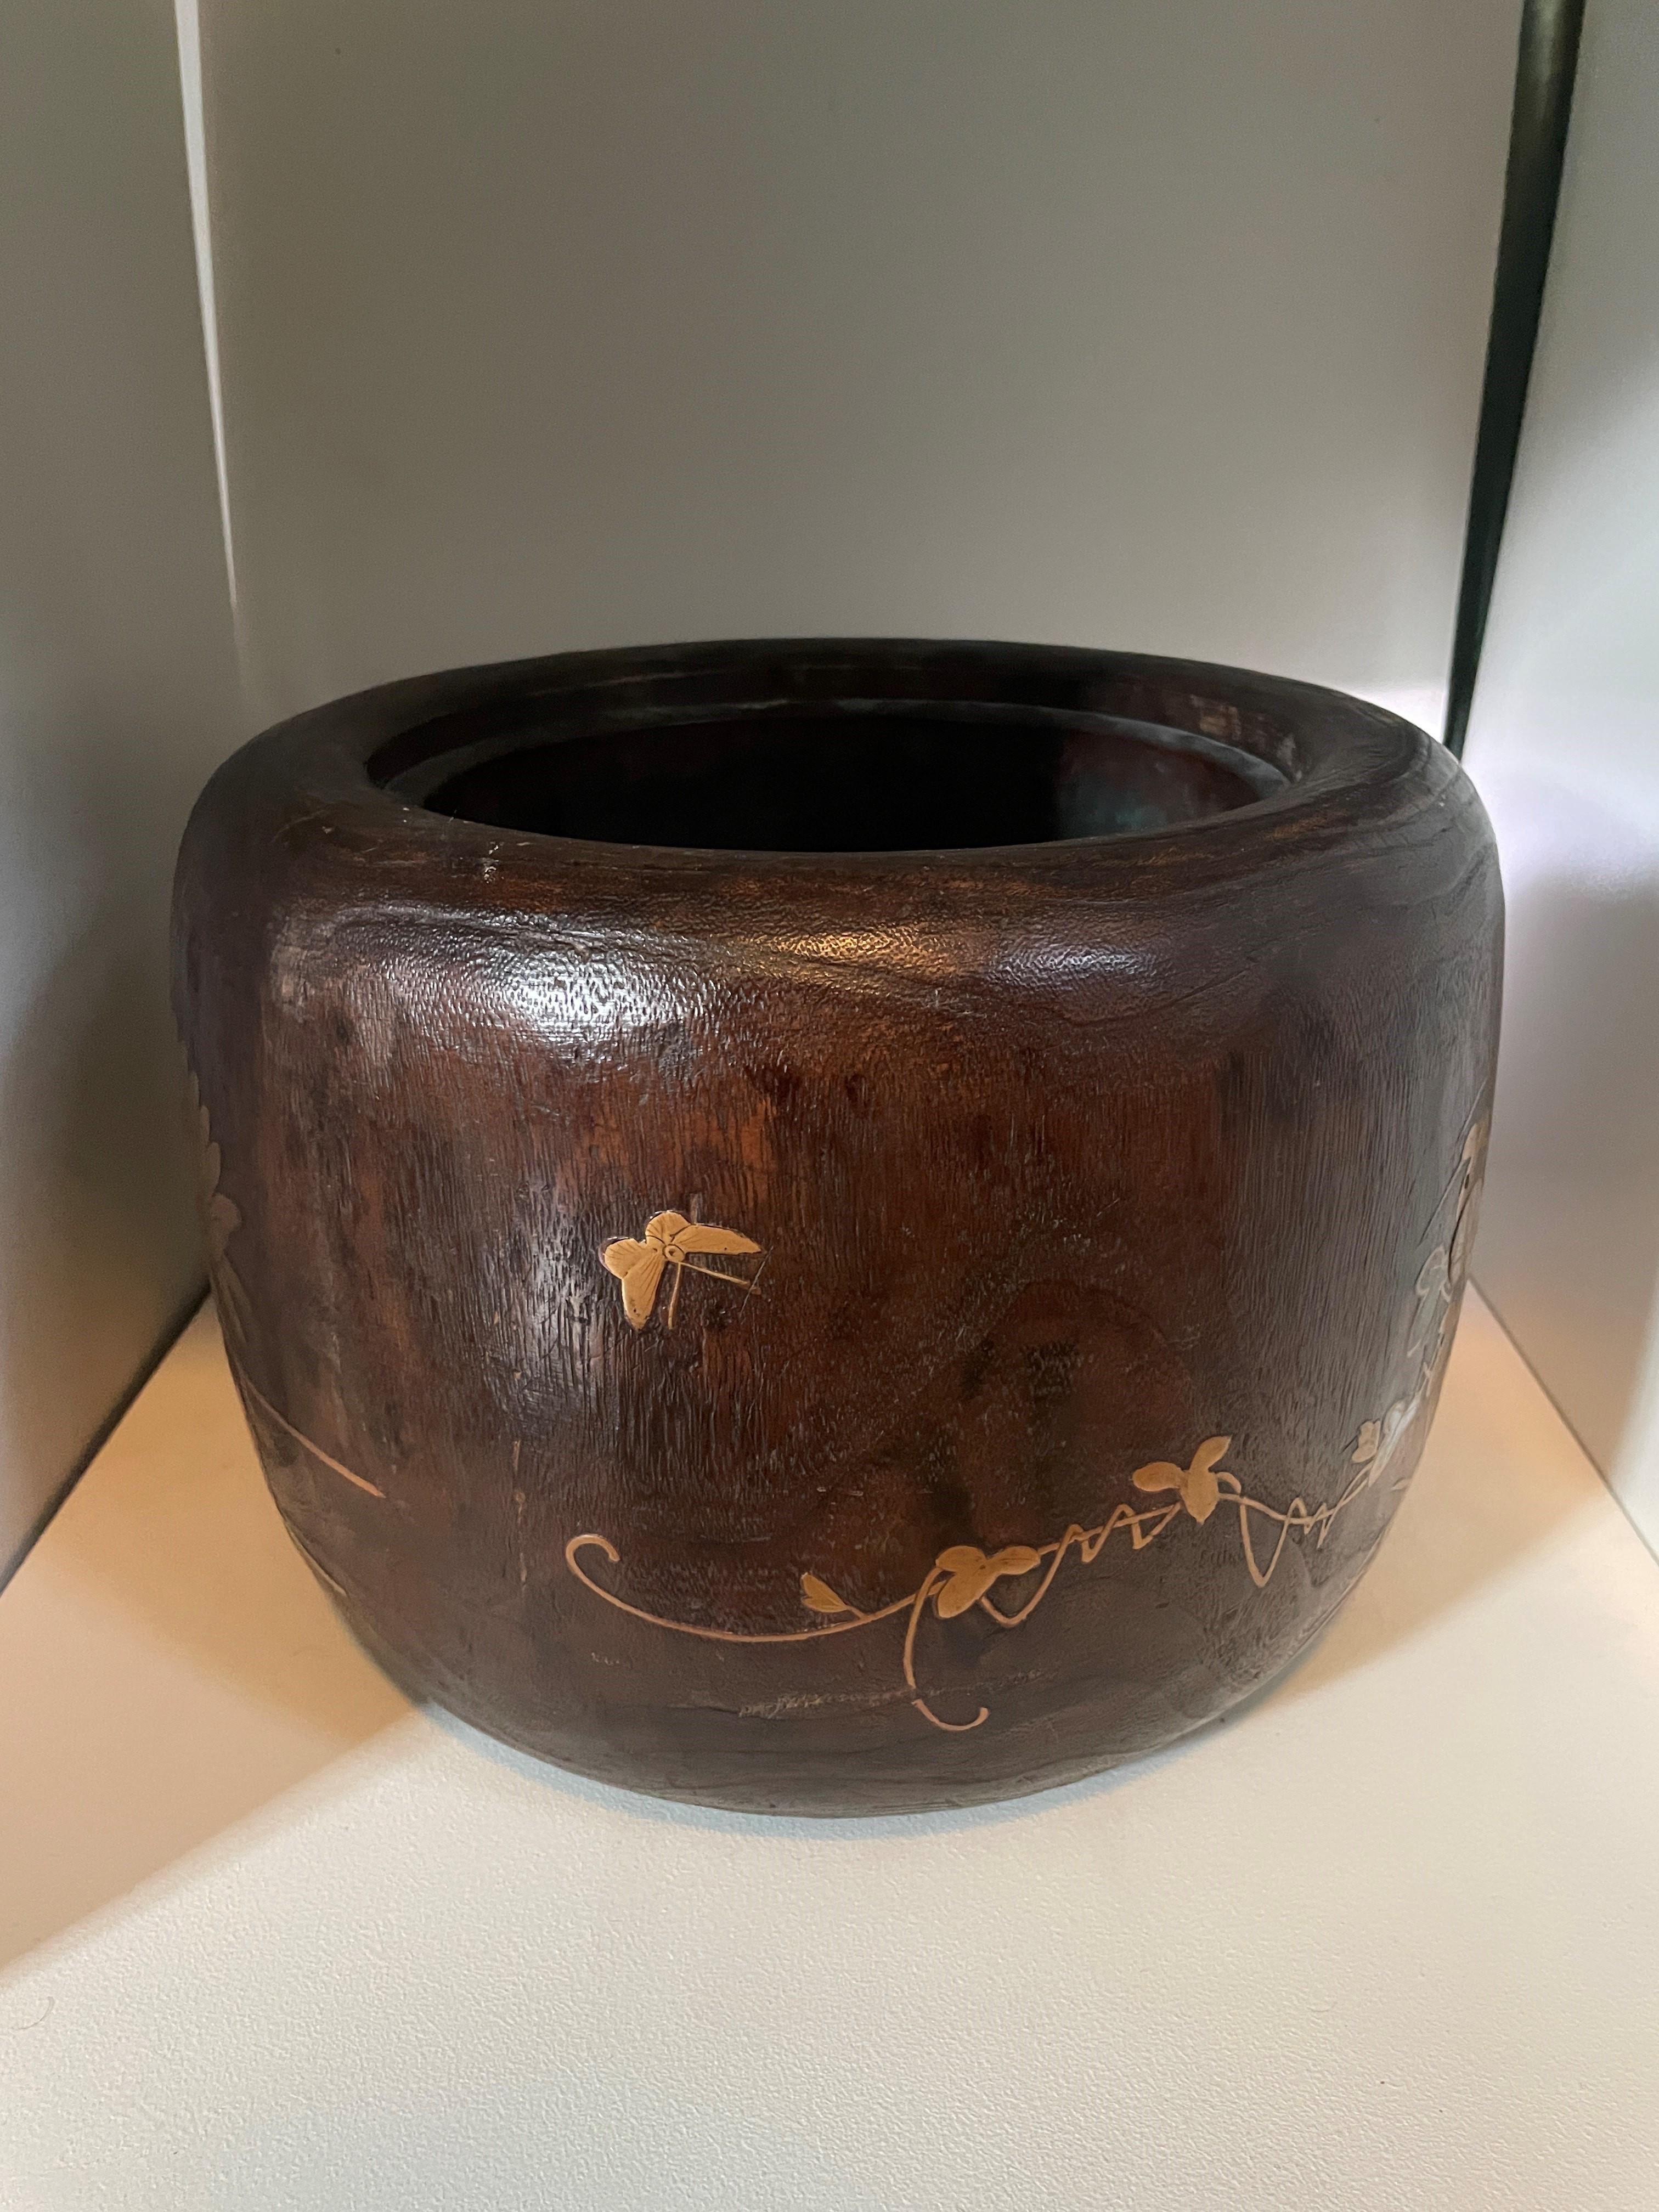 Meiji Period Japanese Planter in carved wood, featuring mother of pearl butterfly and floral insets, and finished copper inserts. Incredible craftsmanship and detail. Wood species unknown but possibly Walnut due to color. Wood was recently cleaned